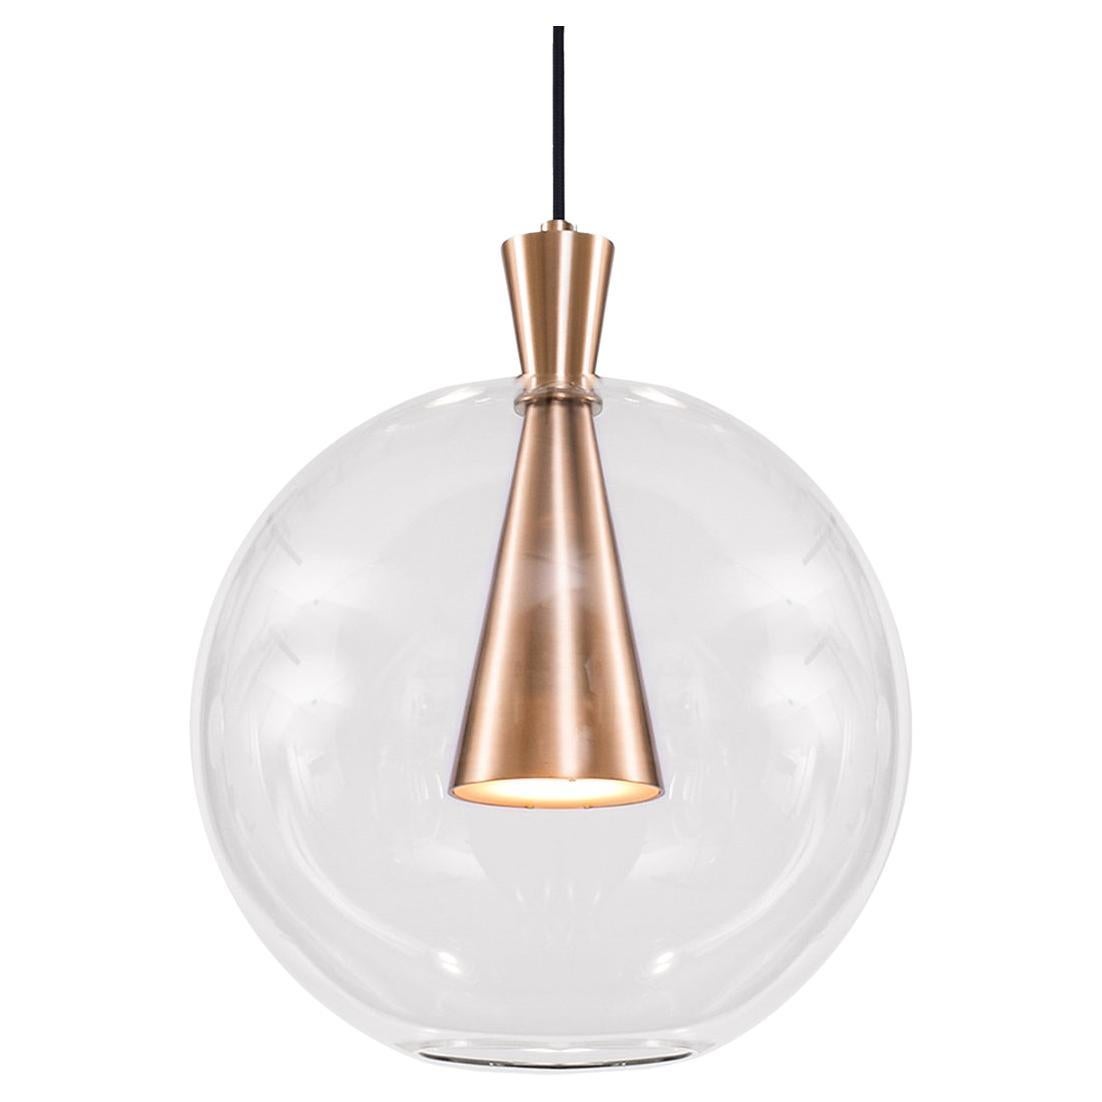 Cone Pendant Lamp and Shade 'Large' by Marc Wood, Handmade Brass Lamp w/GU10